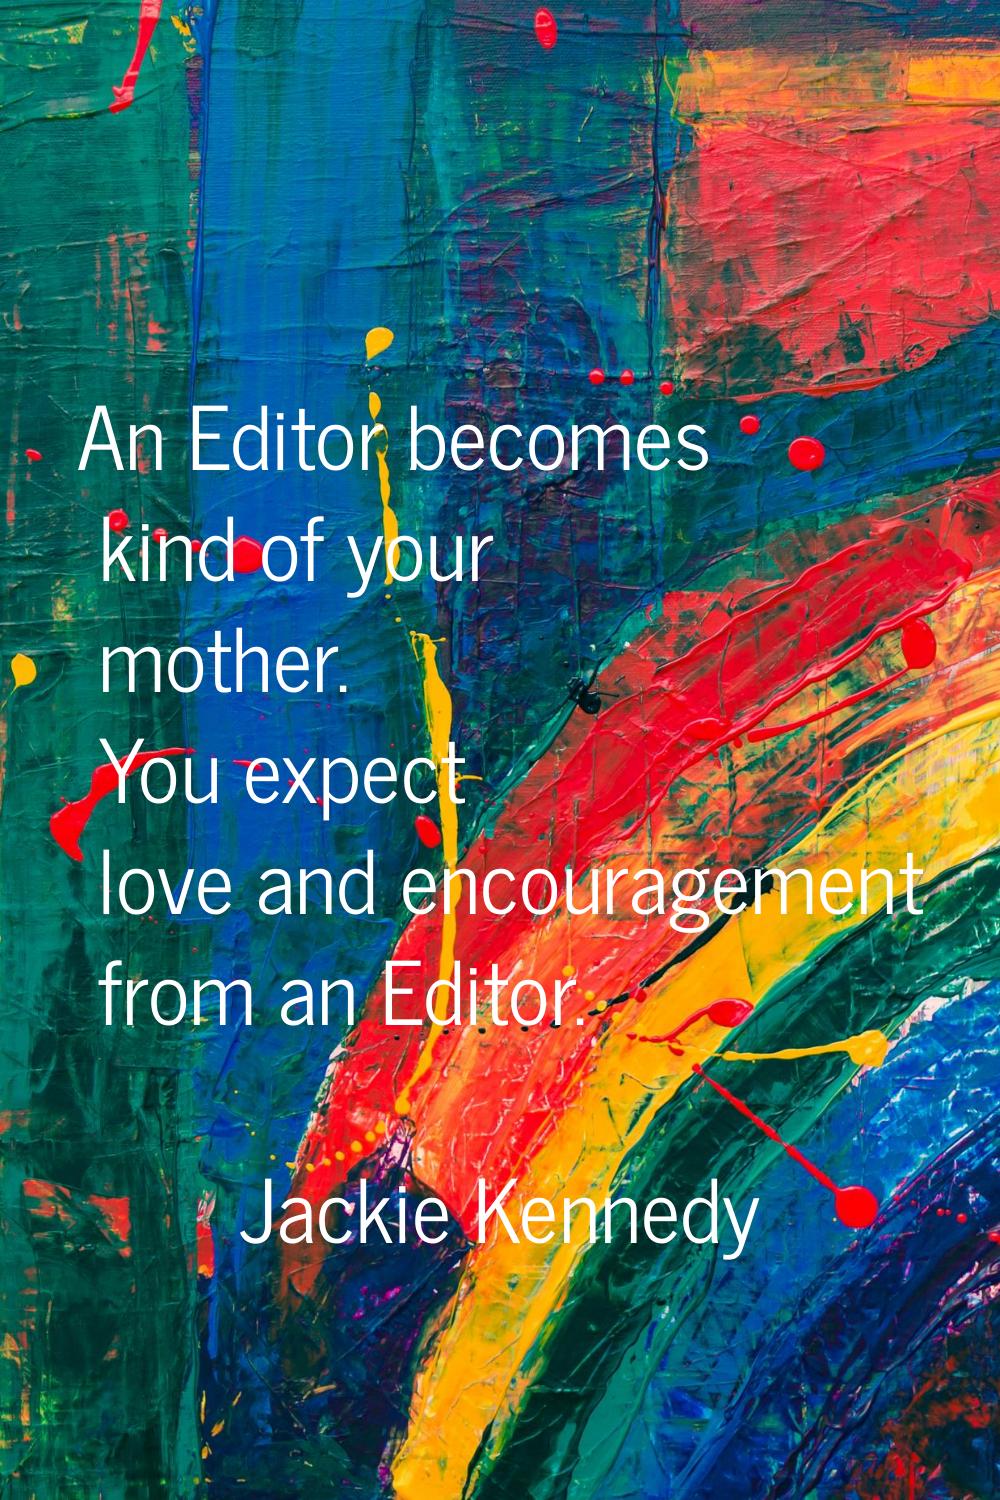 An Editor becomes kind of your mother. You expect love and encouragement from an Editor.